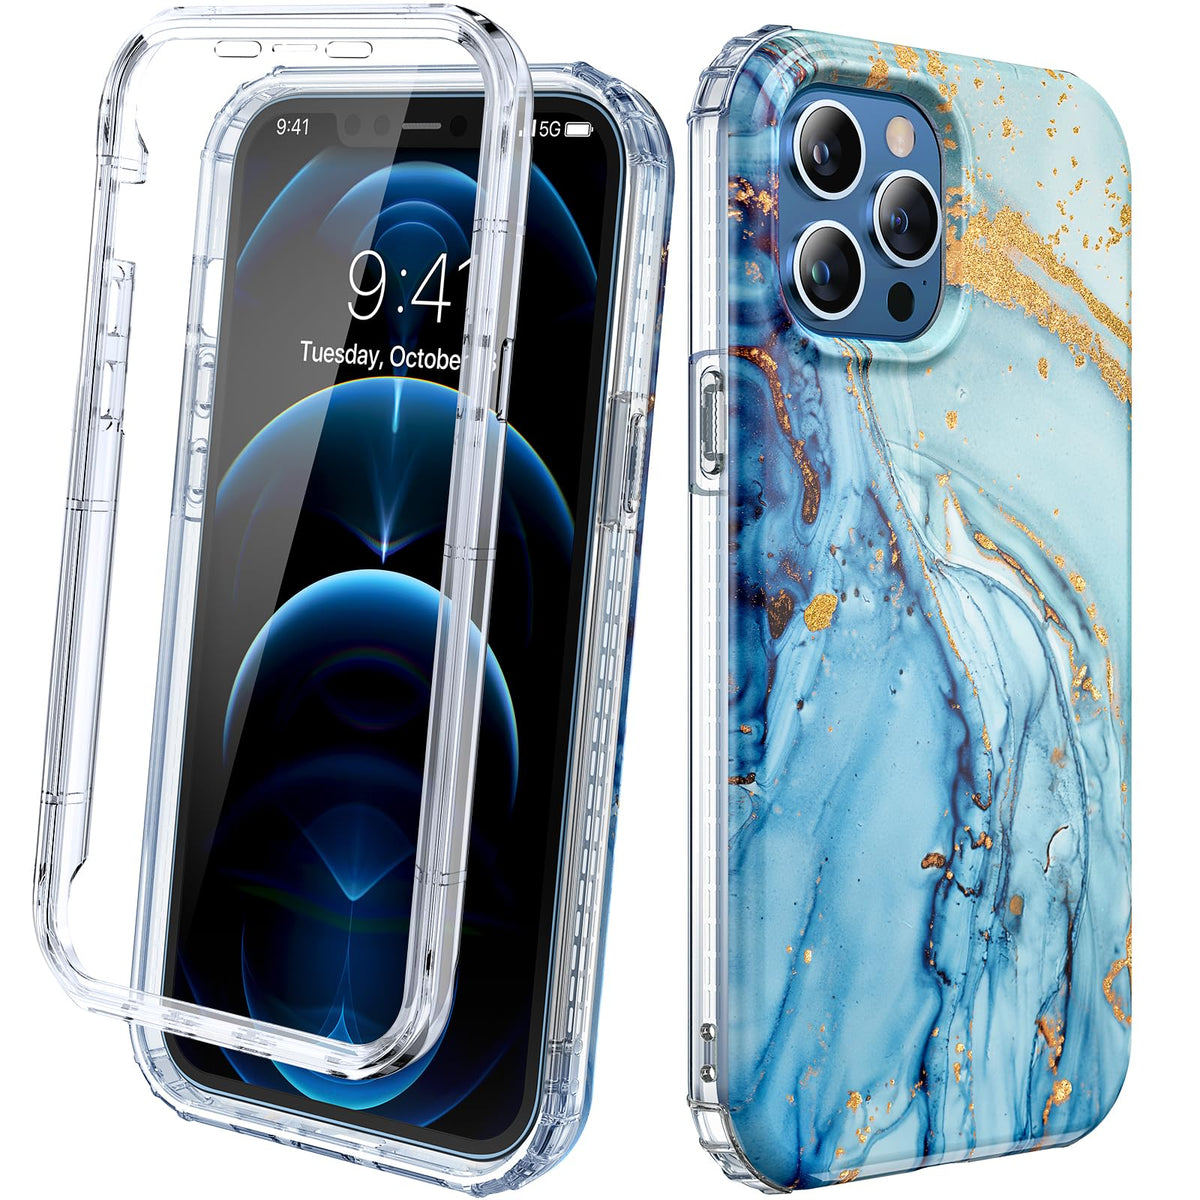 Miracase Designed for iPhone 12 Pro Max Case, Full Body Rugged Case with Built-in Touch Sensitive Anti-Scratch Screen Protector, Soft TPU Case Compatible with iPhone 12 Pro Max 6.7", Gilt Blue